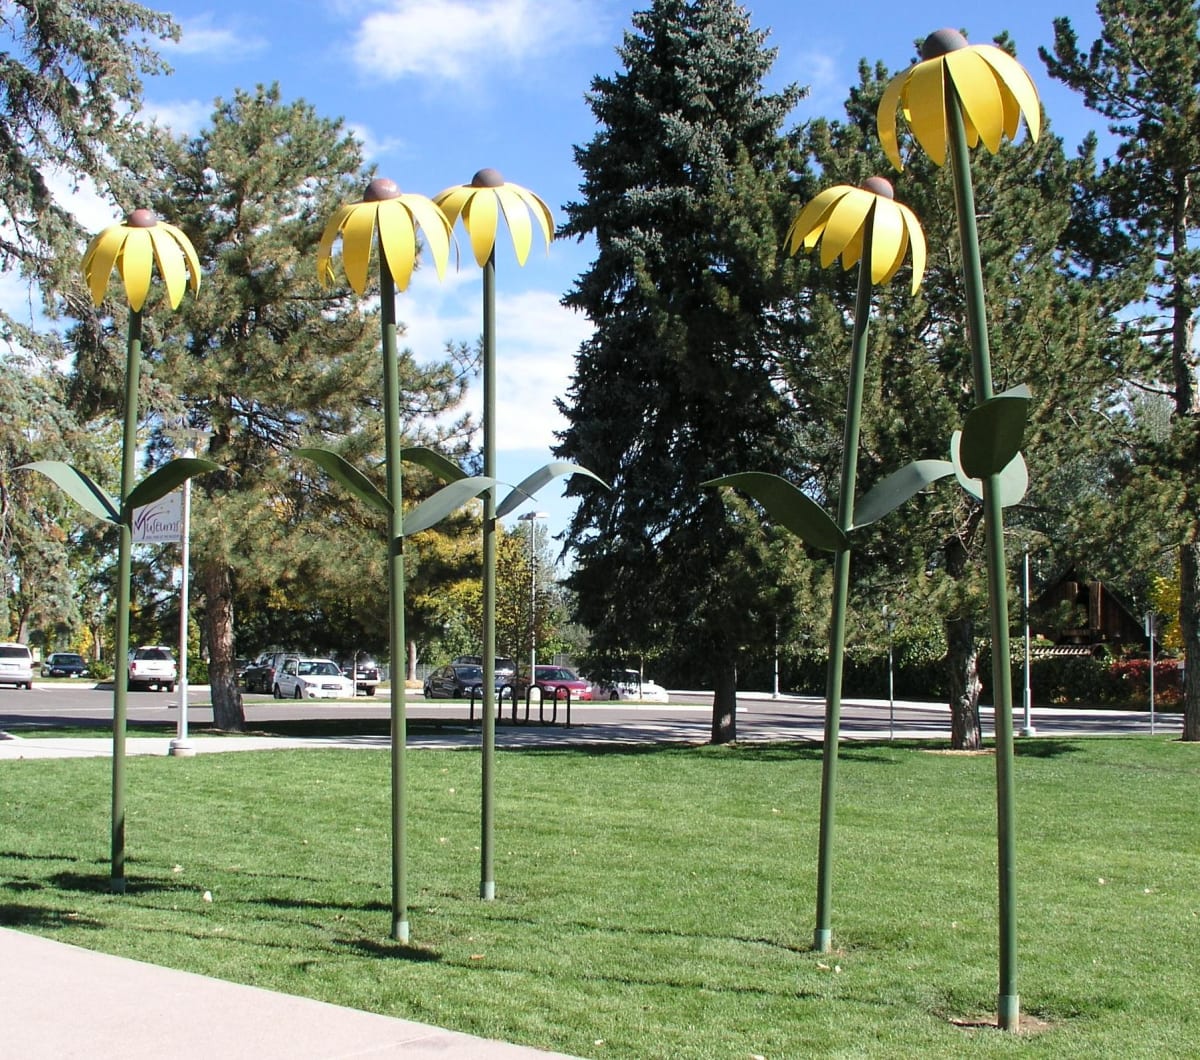 5 Sunflowers by Christopher Weed  Image: "5 Sunflowers" by Christopher Weed, 2002